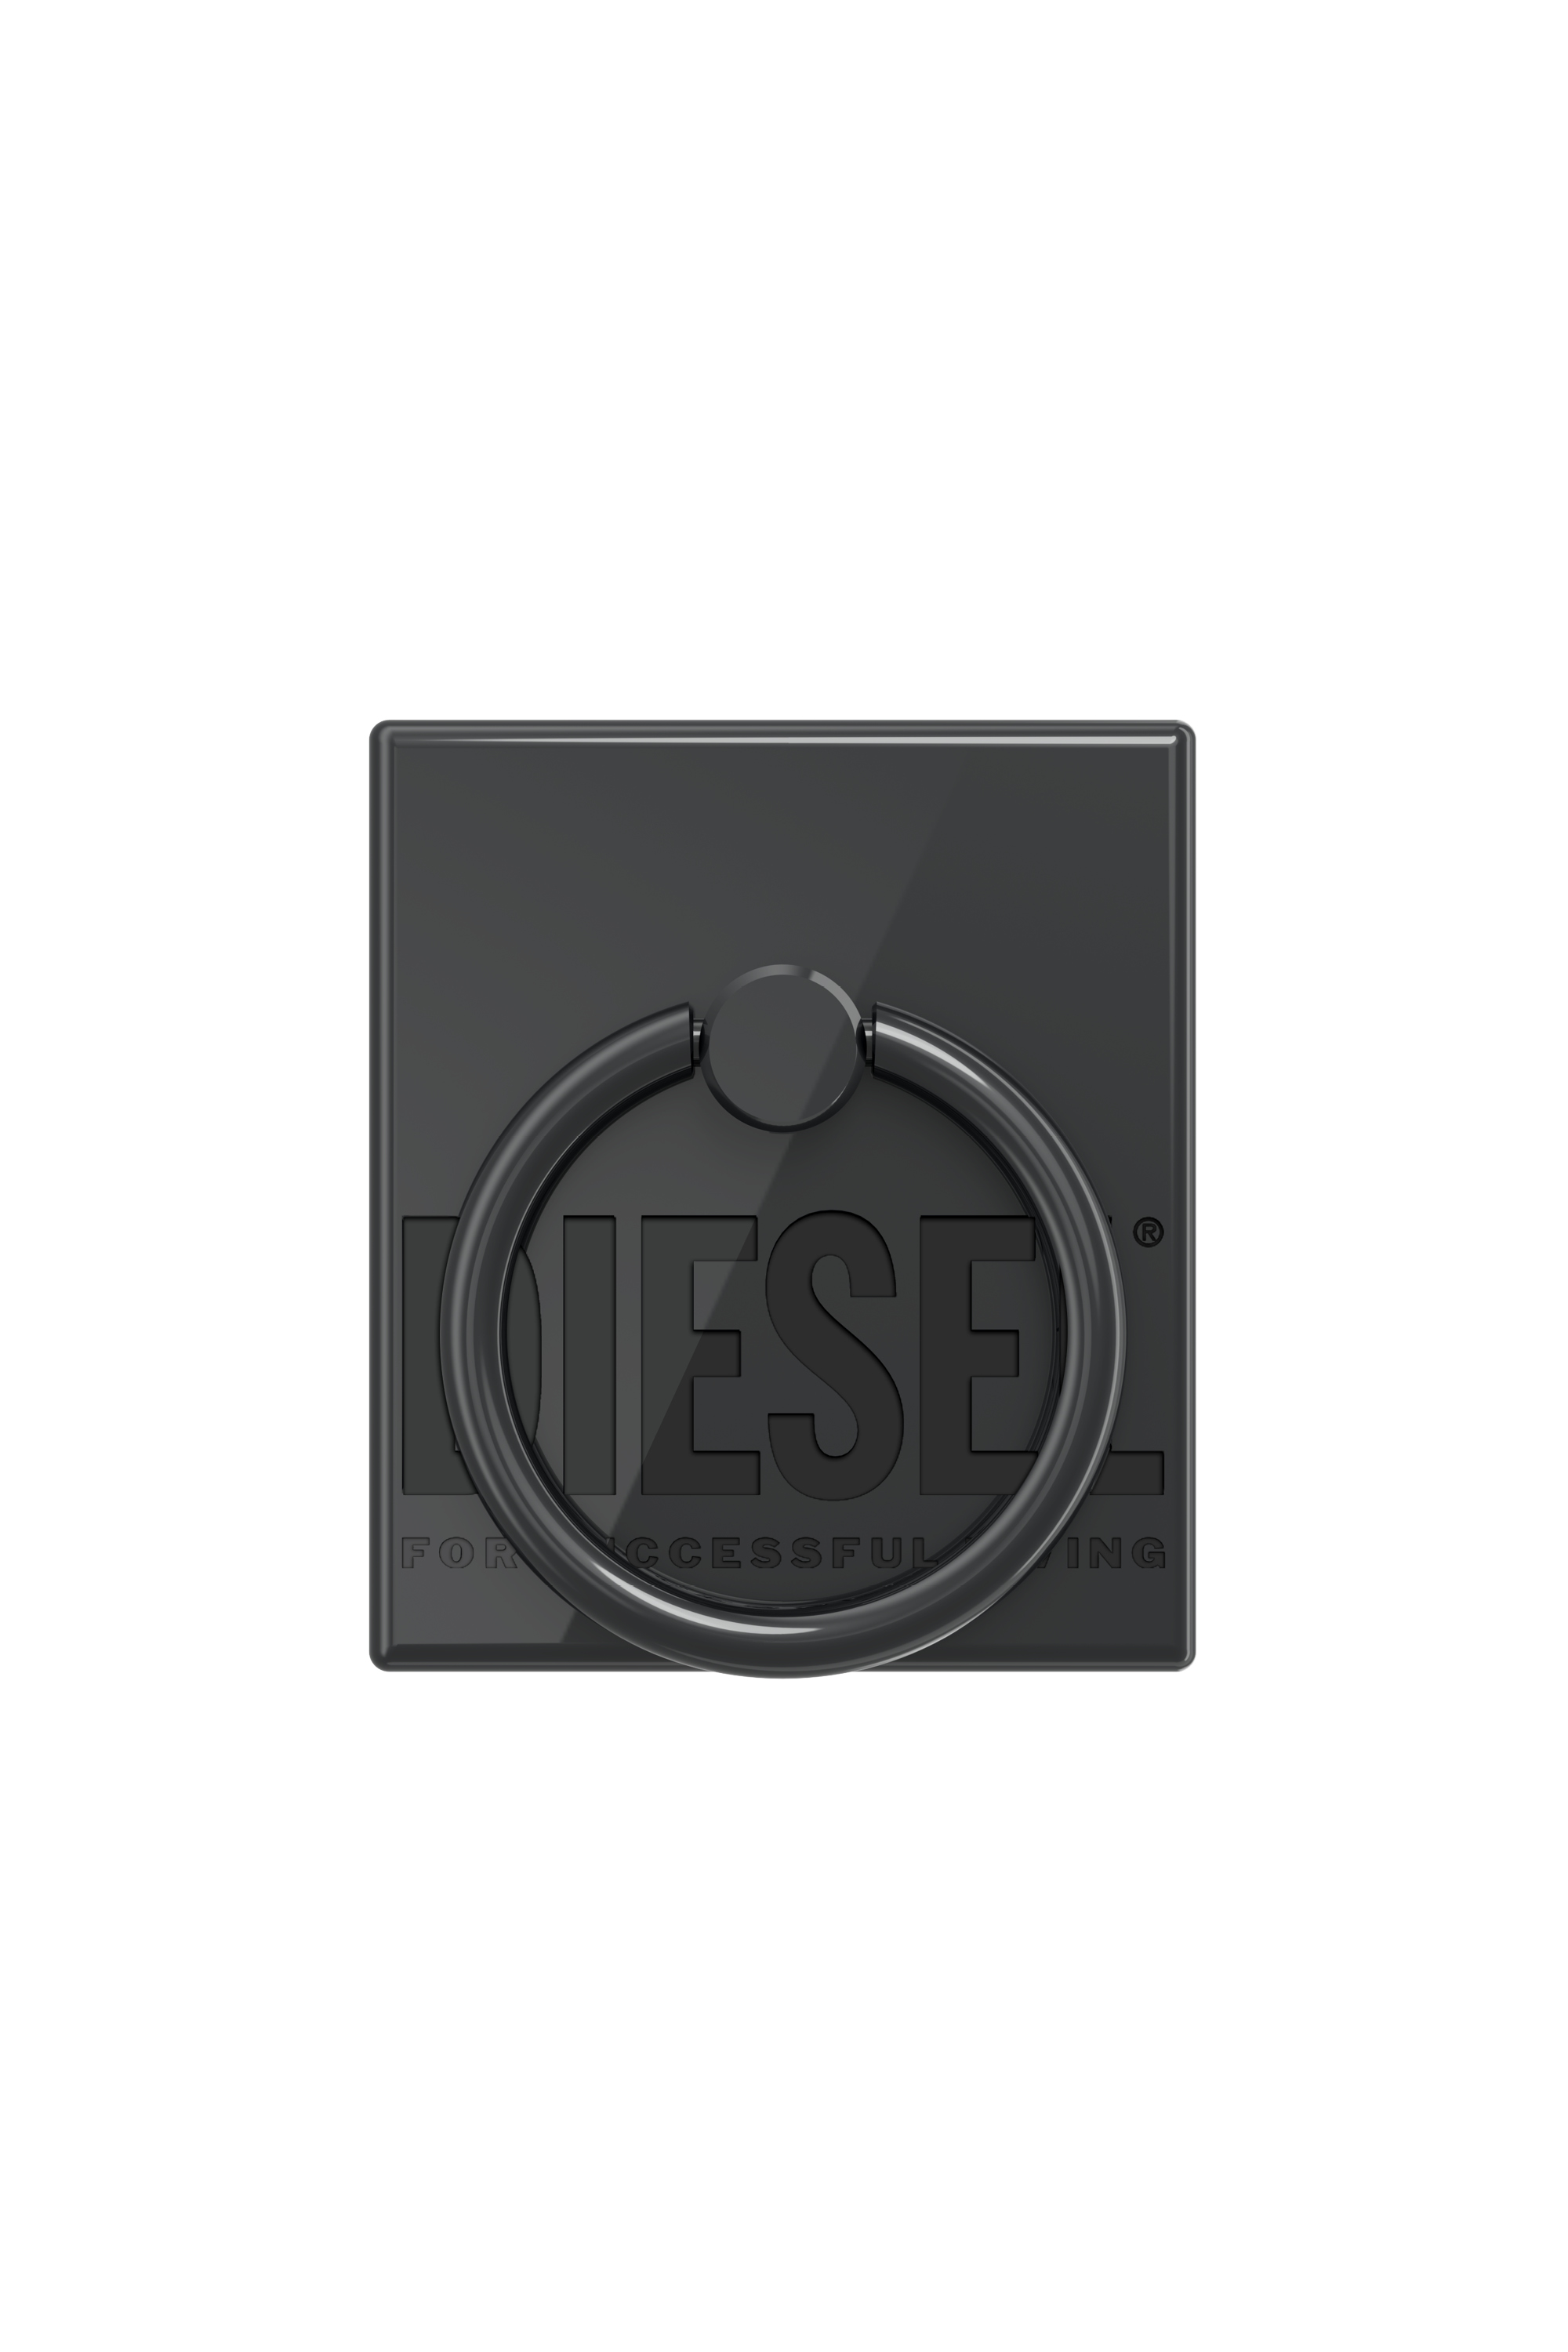 Diesel - Universal phone ring rectangle - Ring stands - Unisex - Black